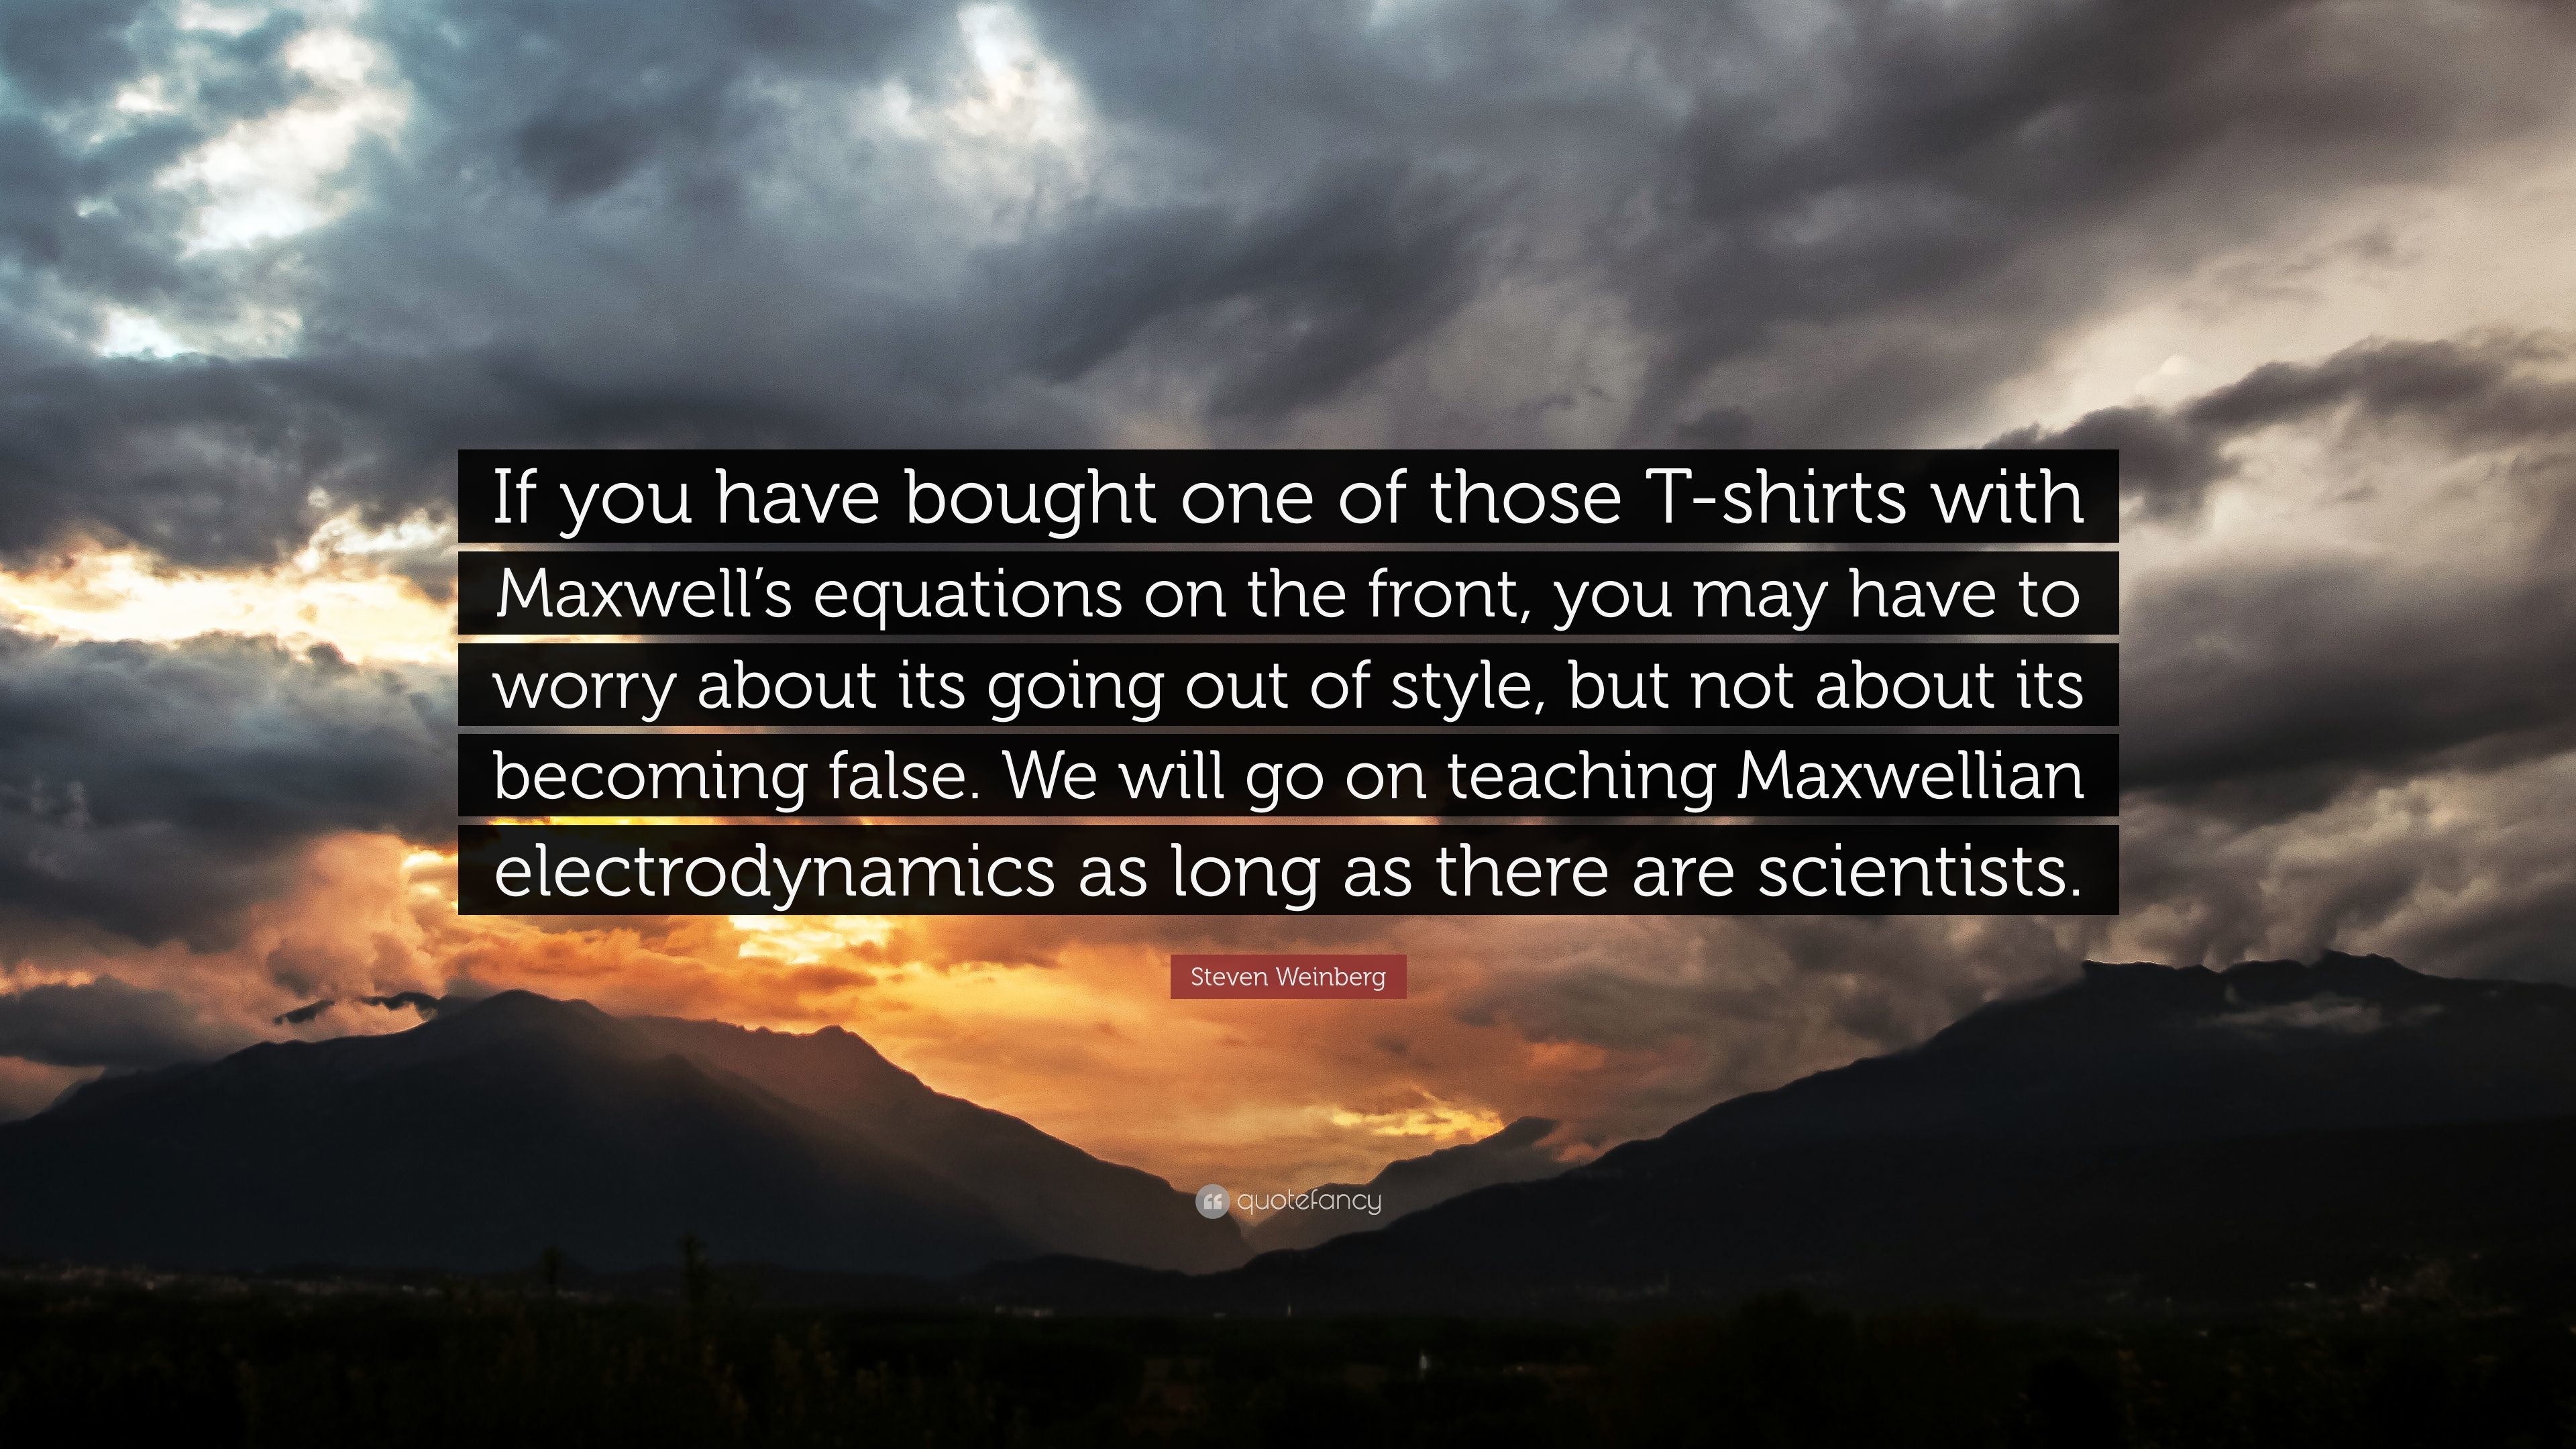 3840x2160 Steven Weinberg Quote: “If you have bought one of those T-shirts with